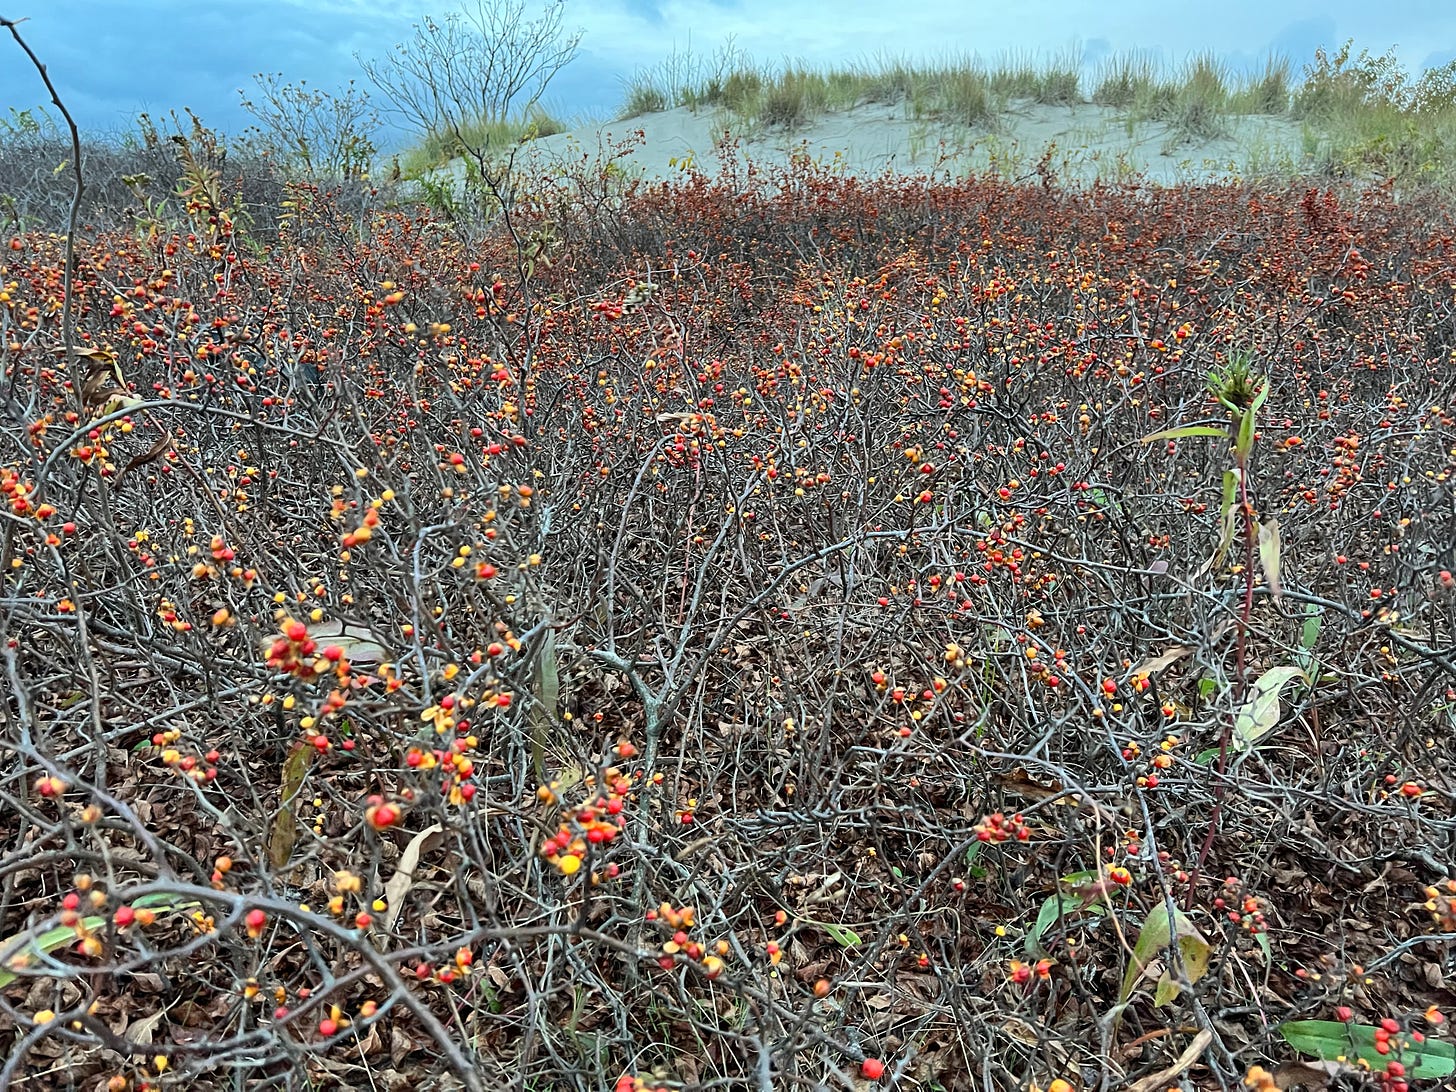 a vast tangle of brown vines with bright red and yellow berries interspersed atop of them. there's a grass-topped sand dune in the background.